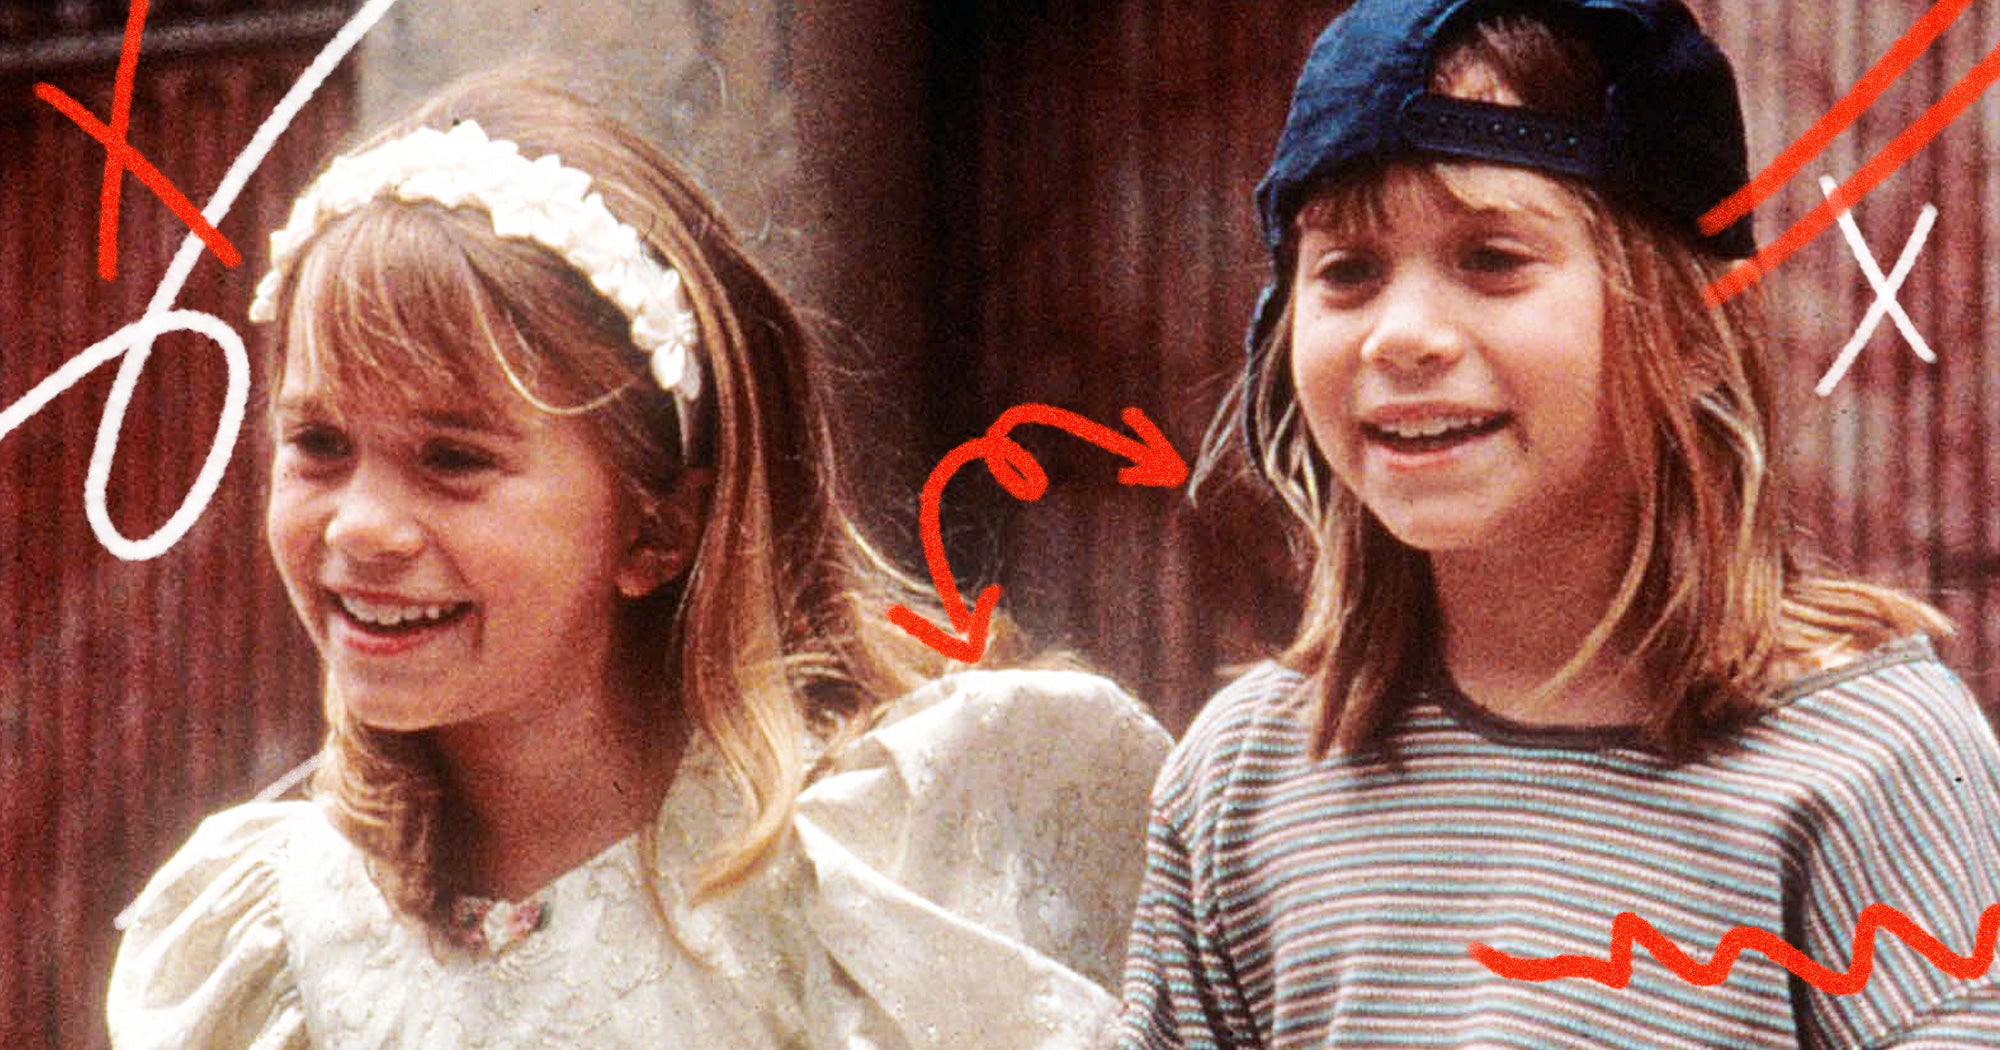 It Takes Two (1995) Official Trailer - Mary-Kate Olsen, Ashley Olsen Movie  HD 